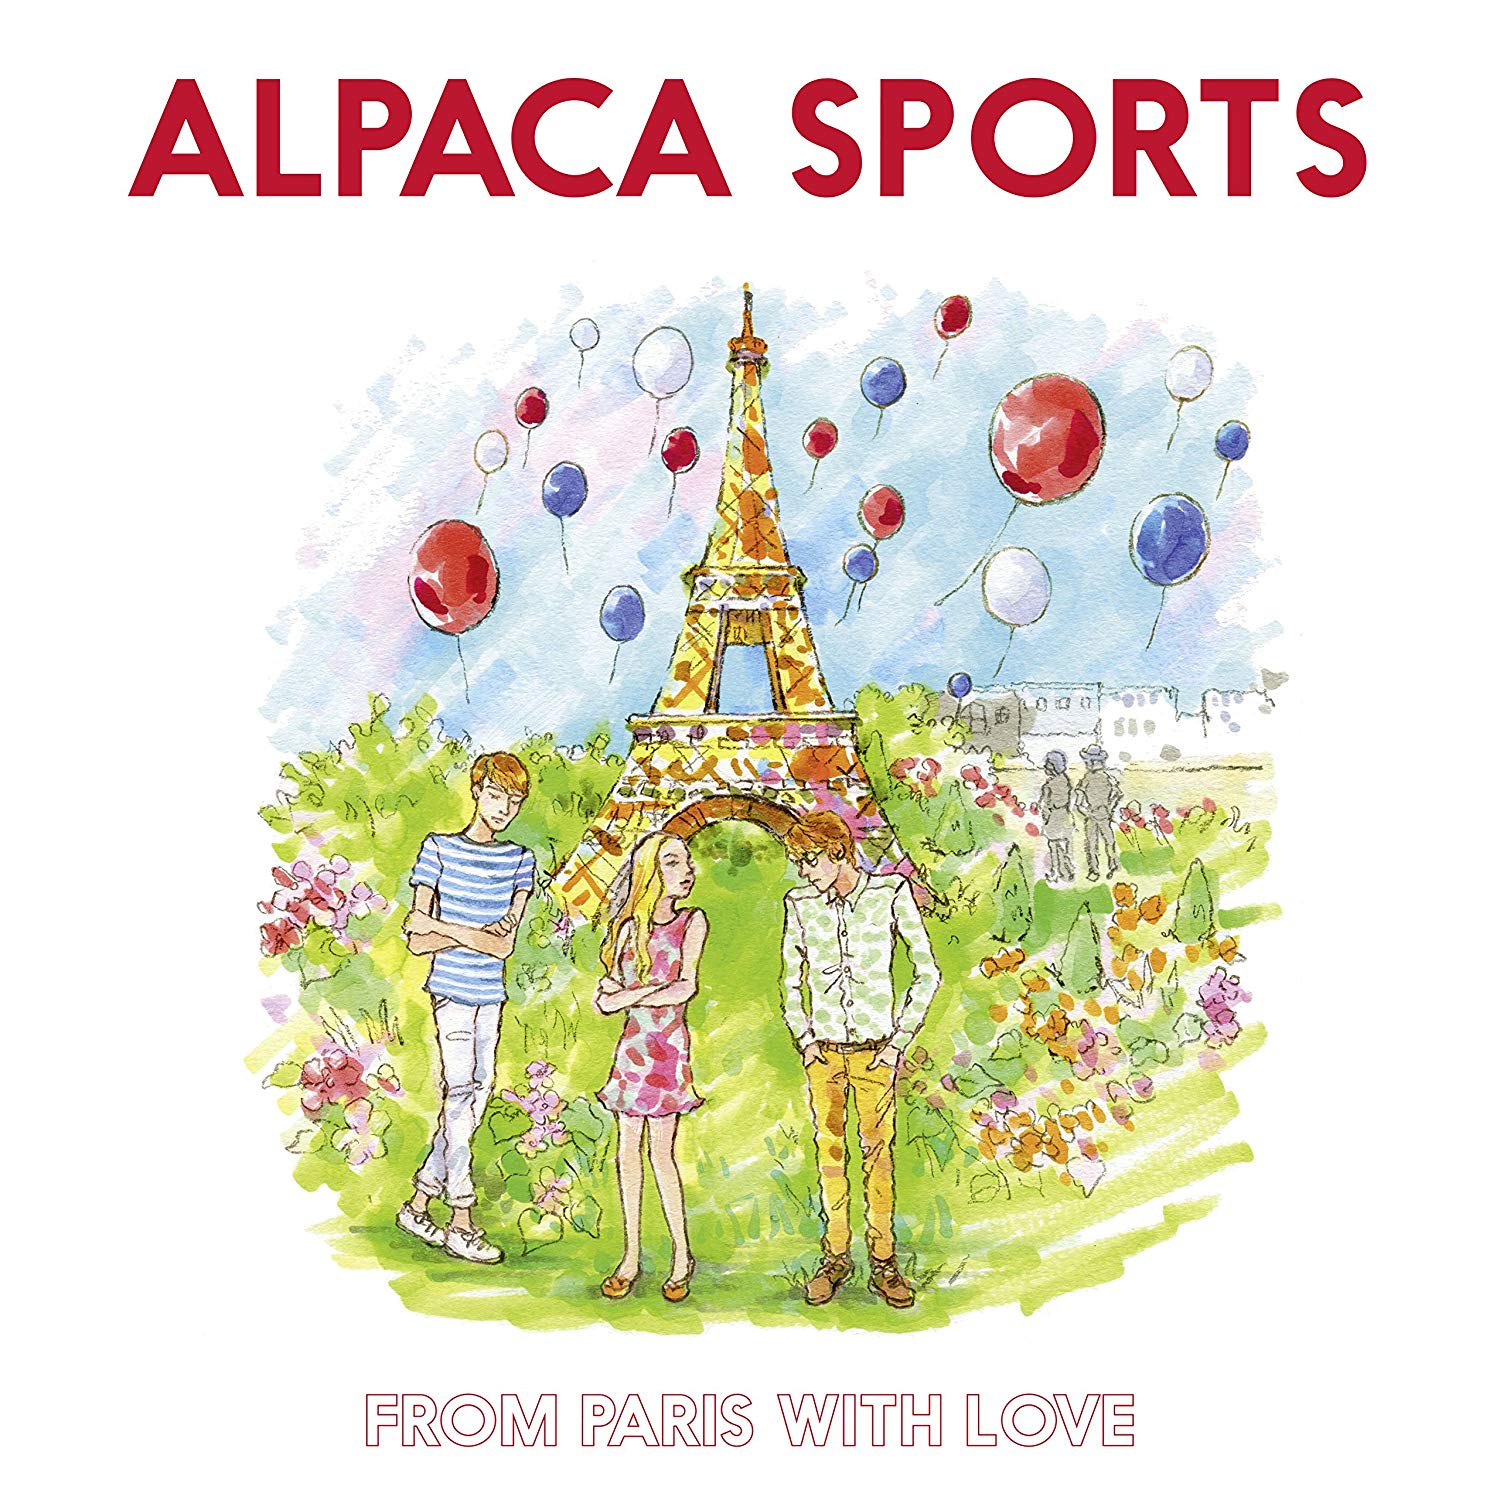 alpaca sports from paris with love